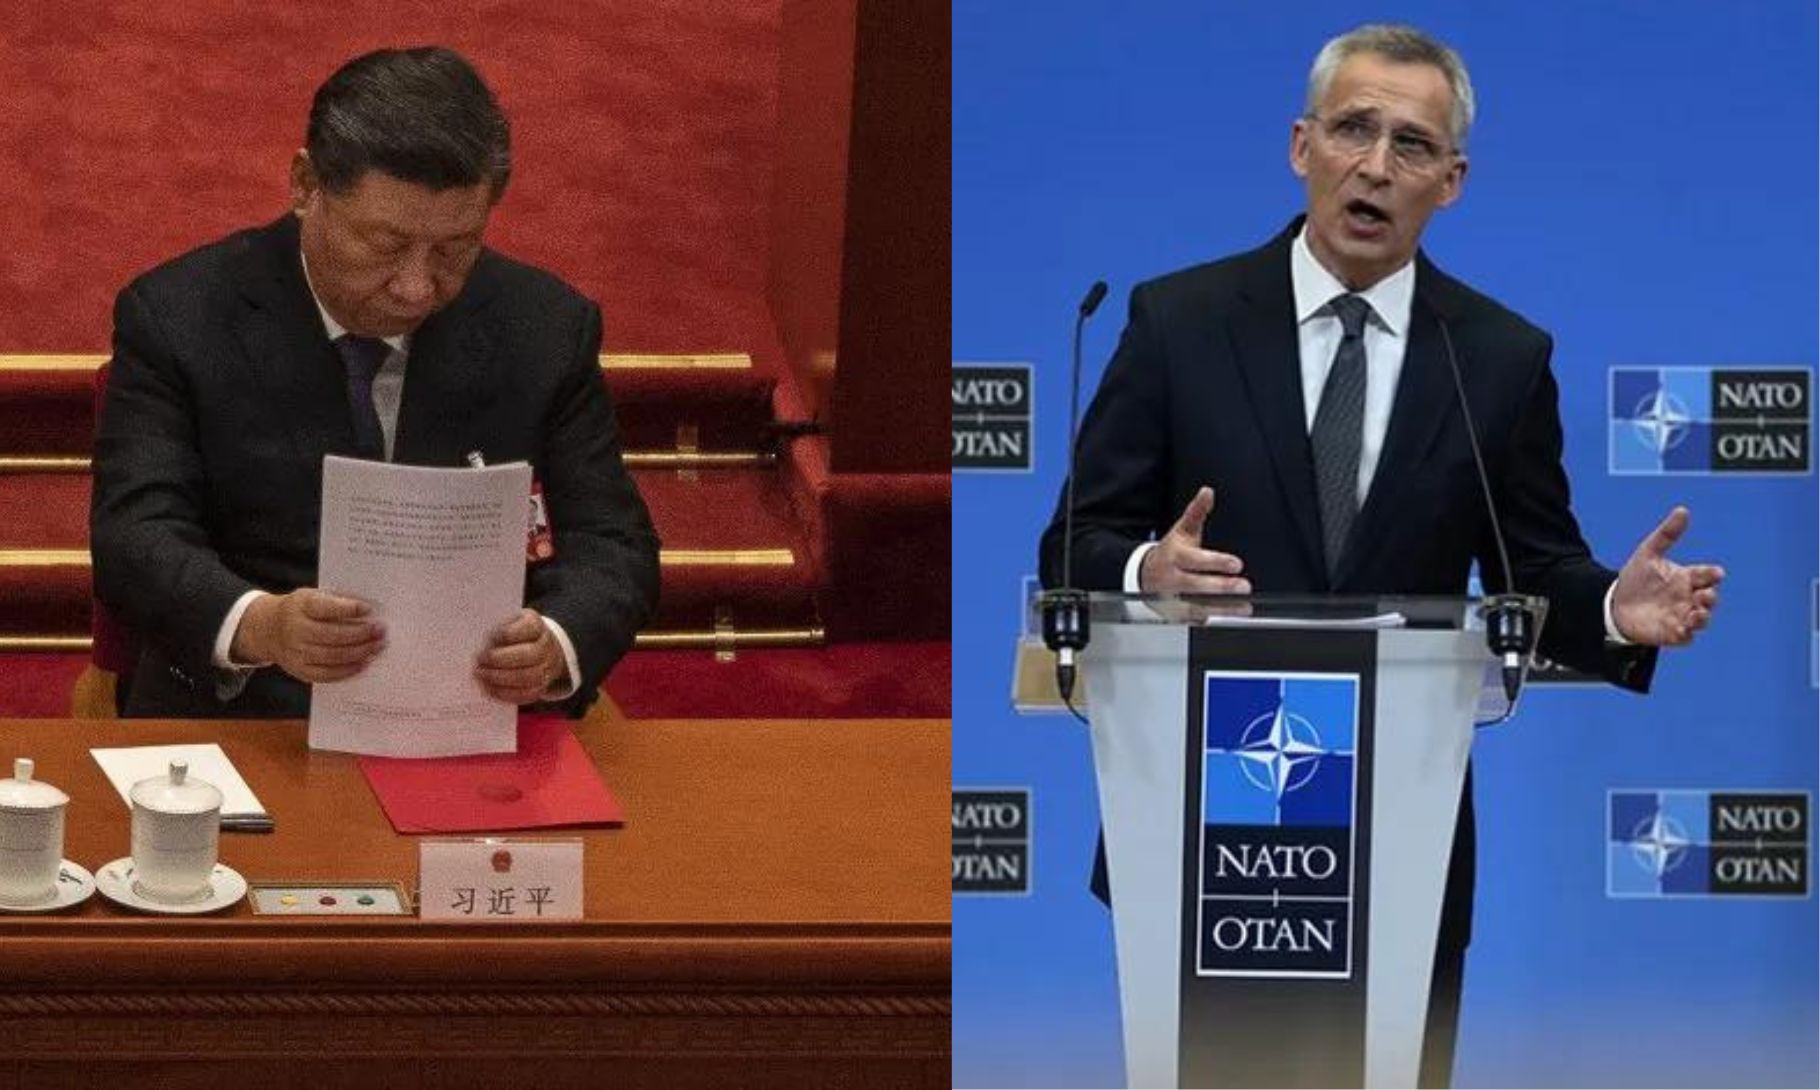 NATO Condemns China For Enabling Russia In Ukraine Conflict